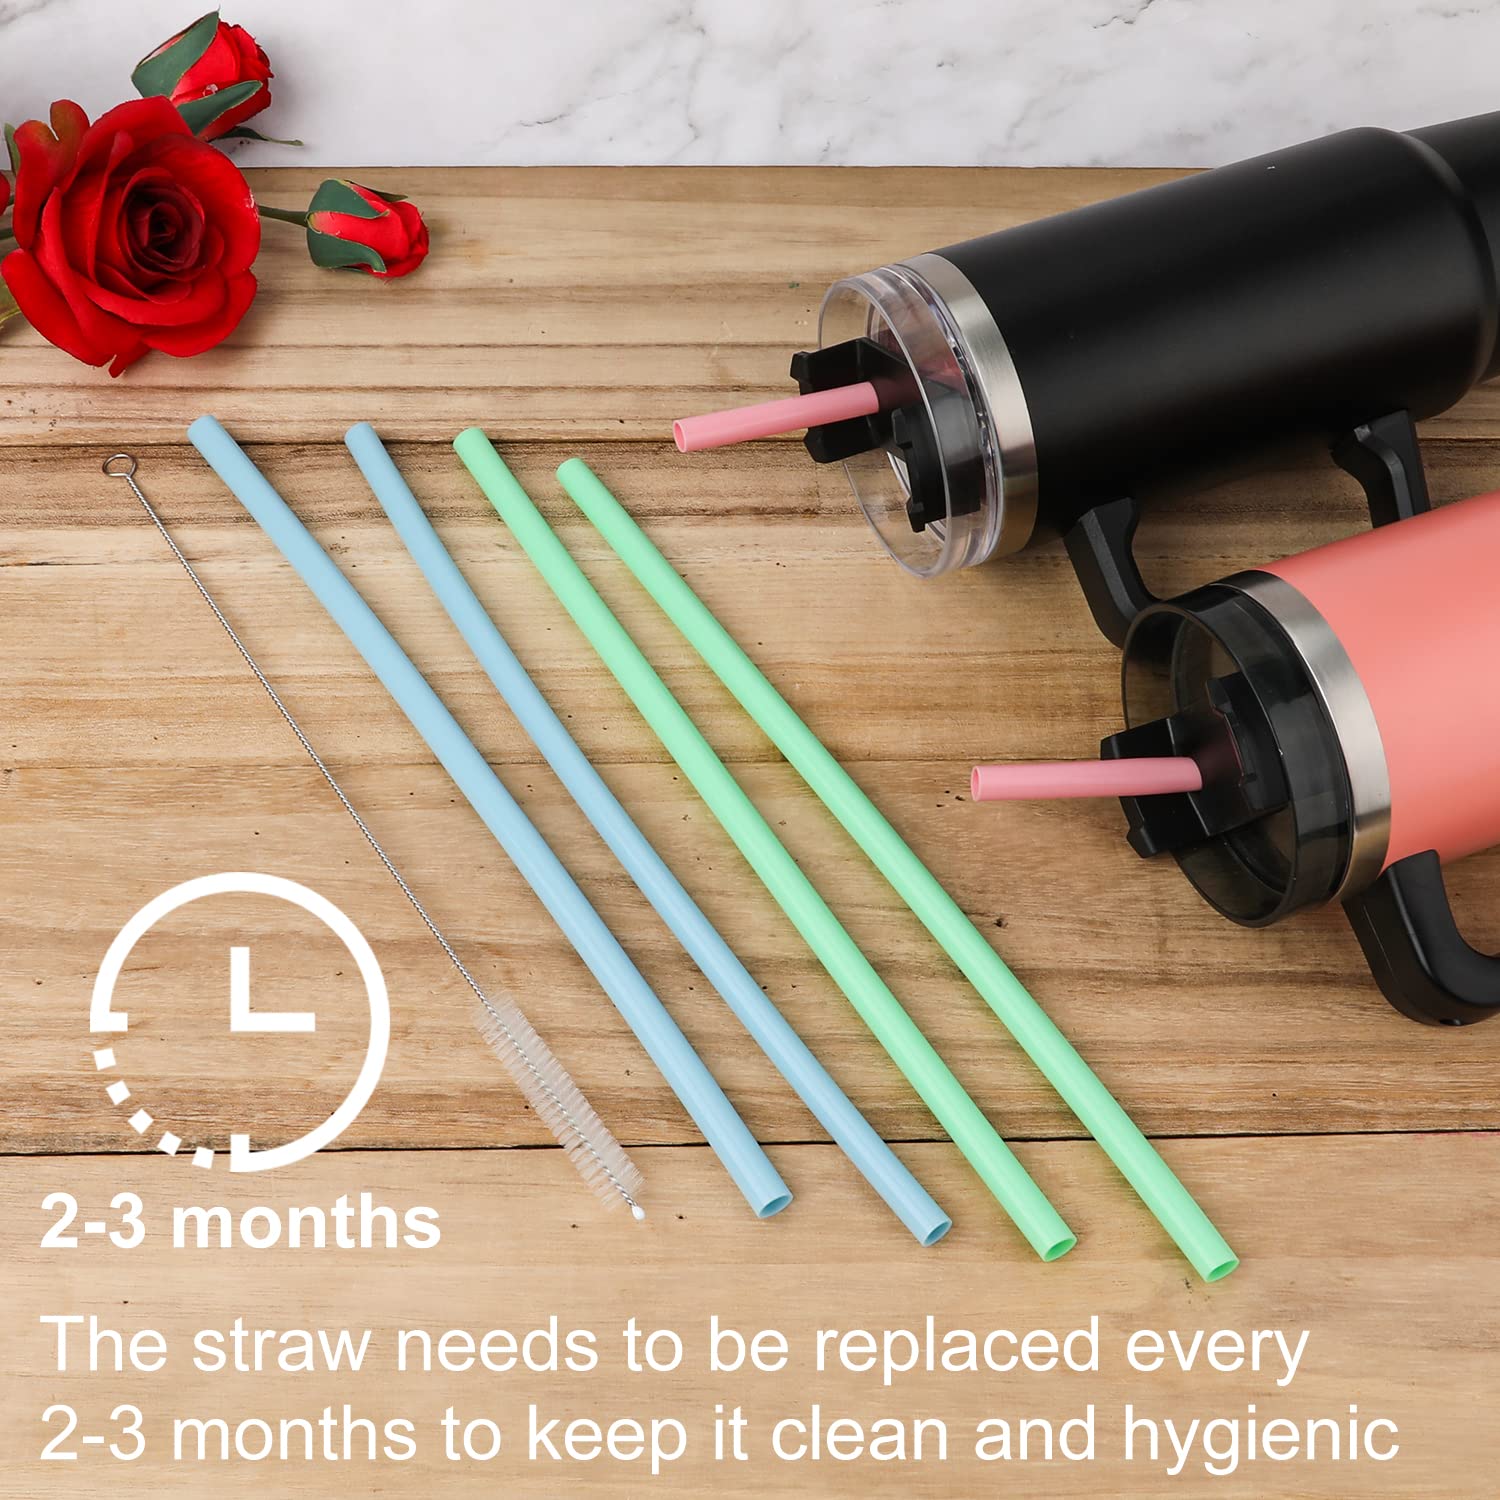 6pcs Replacement Straws for Stanley Adventure Travel Tumbler 40oz, with Cleaning Brush Silicone Replacement Straw Reusable Plastic Straws for Stanley Cup 40 oz Water Jugs (Blue, Pink, Green)